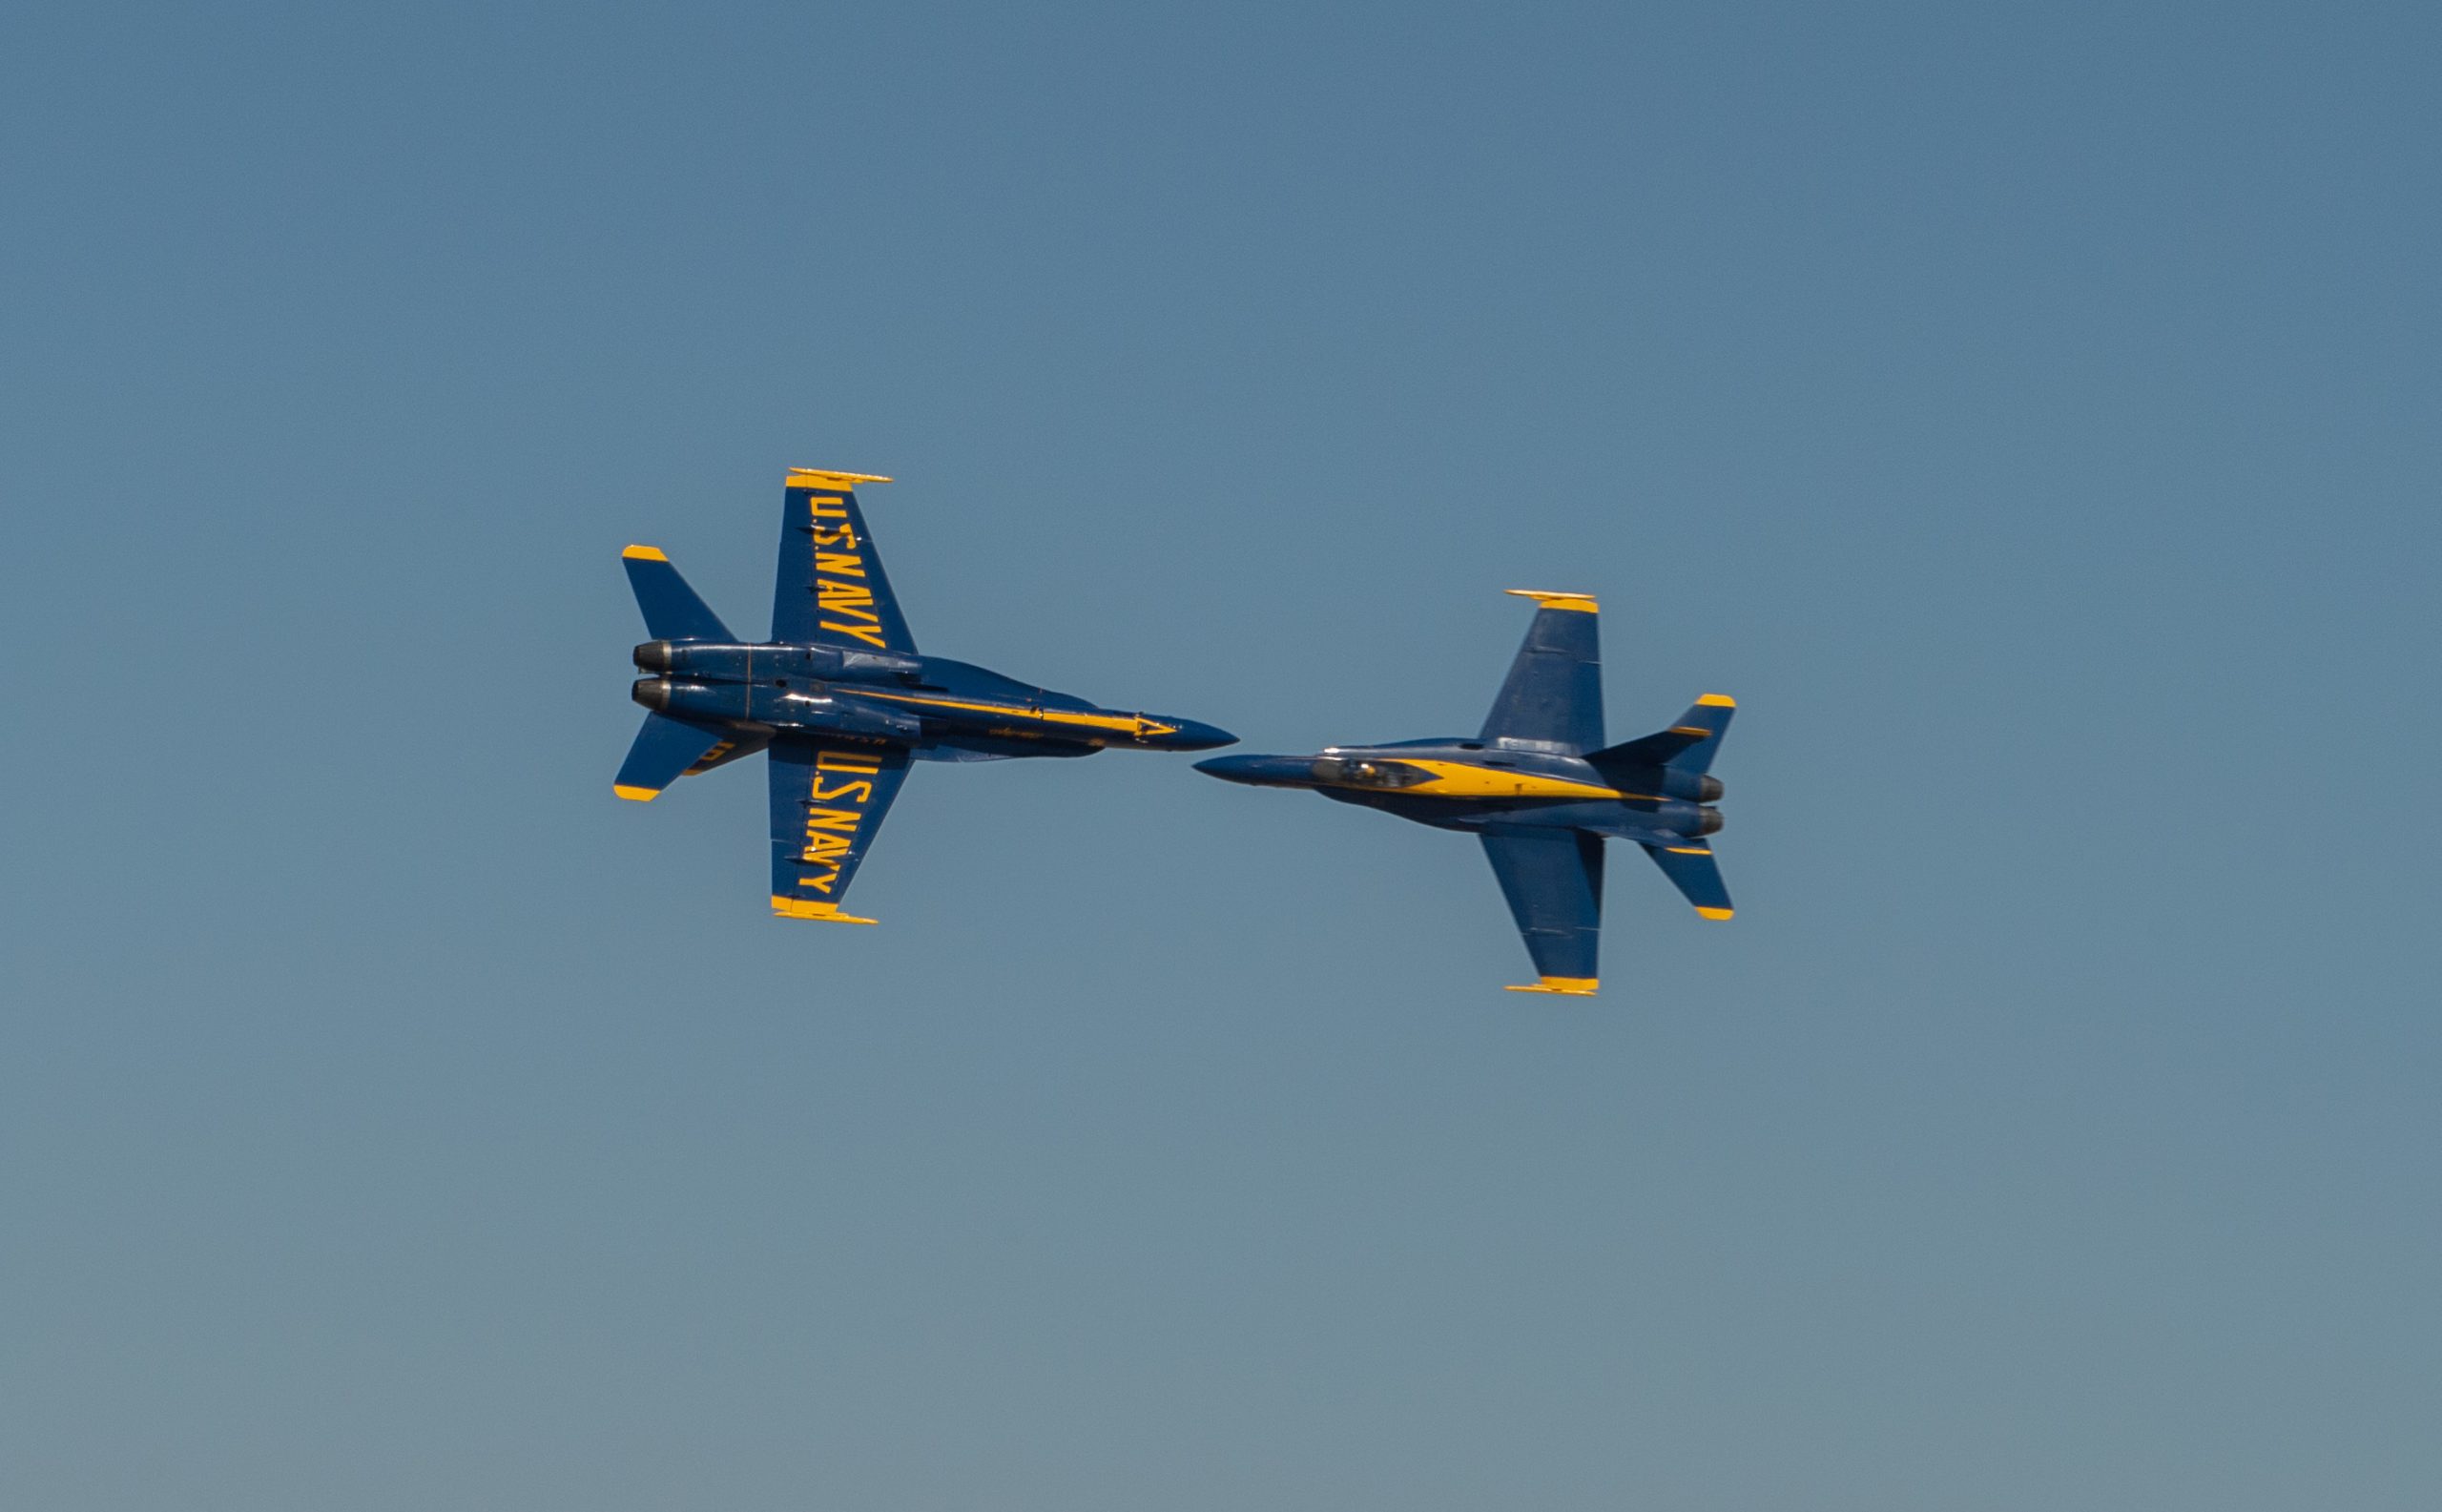 Are You Ready For The 2022 Blue Angels Air Shows Here Is Where The Team Will Perform Next Year